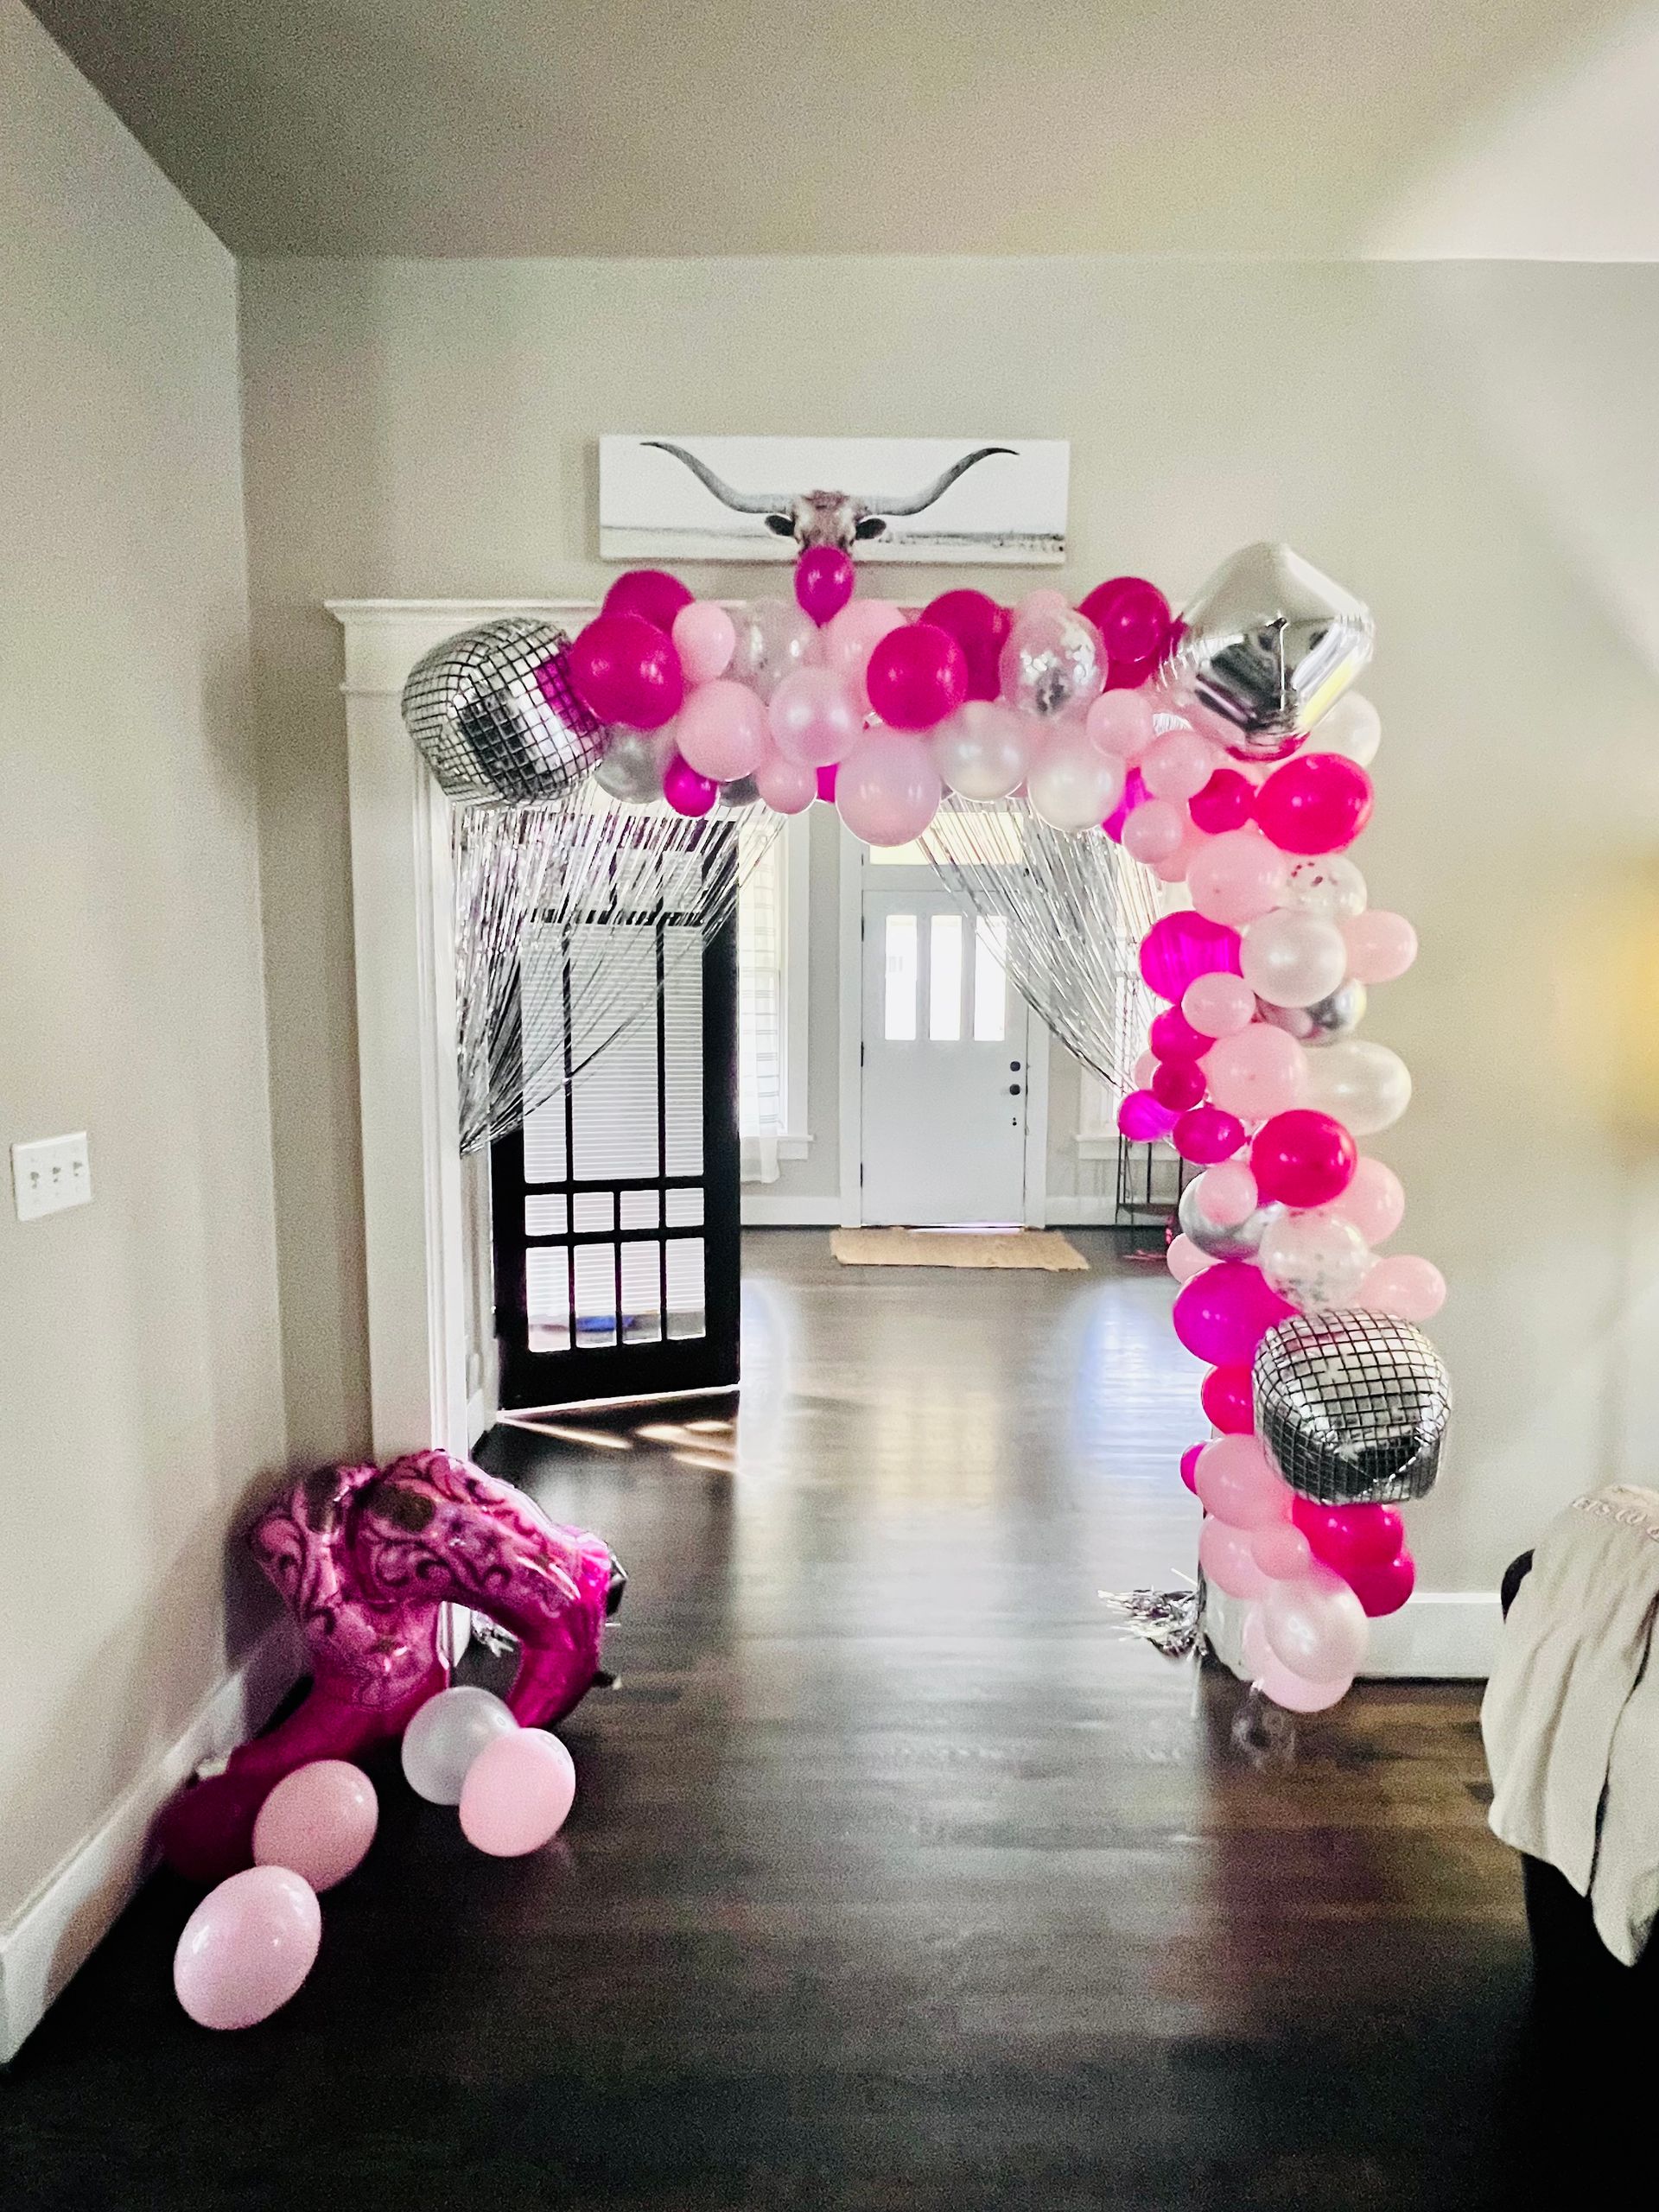 Party Decoration Packages with Delivery and Setup Included: Basic, Boujee, & Beyond image 22